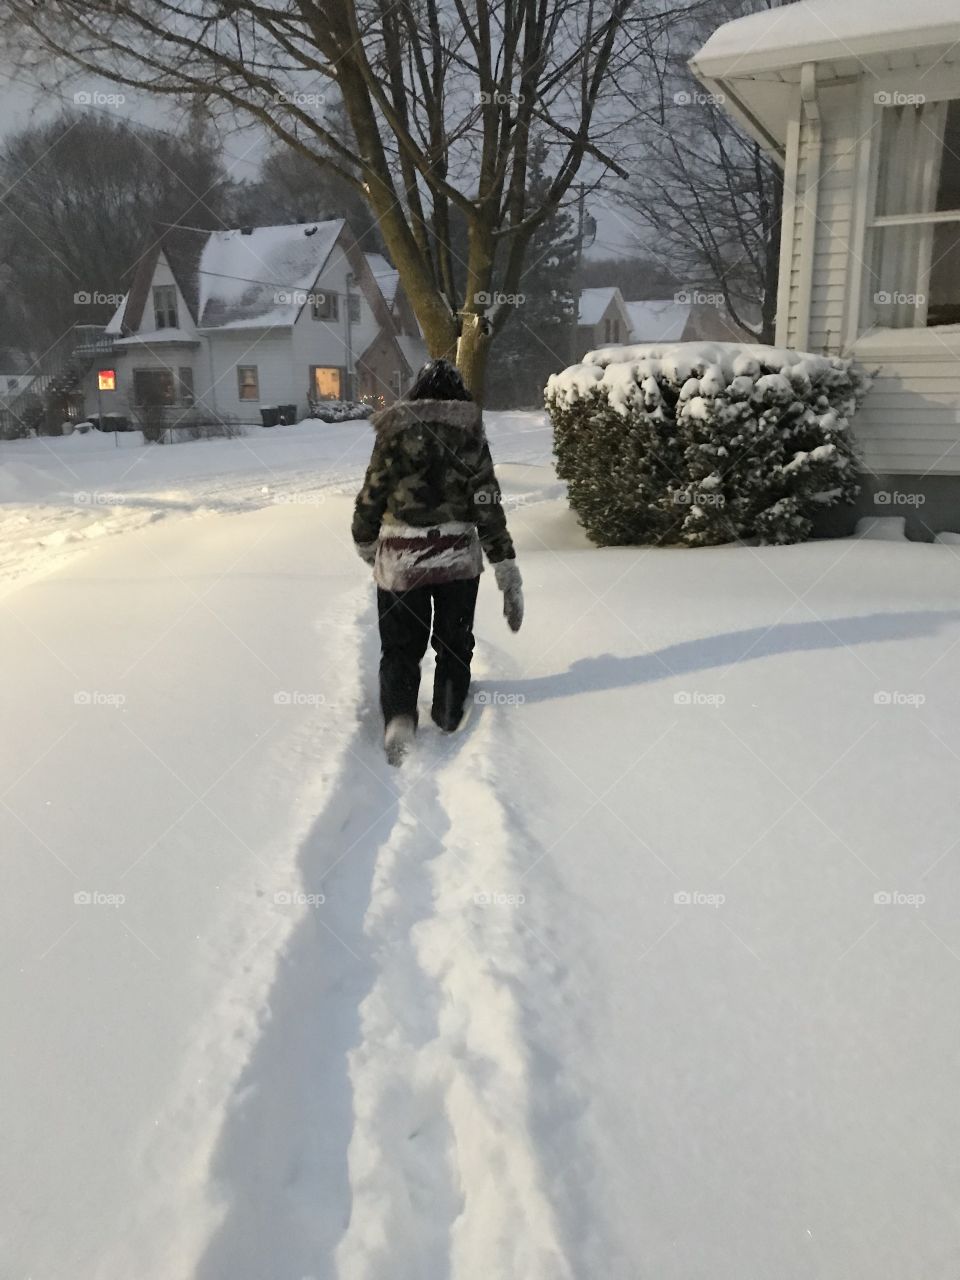 Taking a walk in the snow 